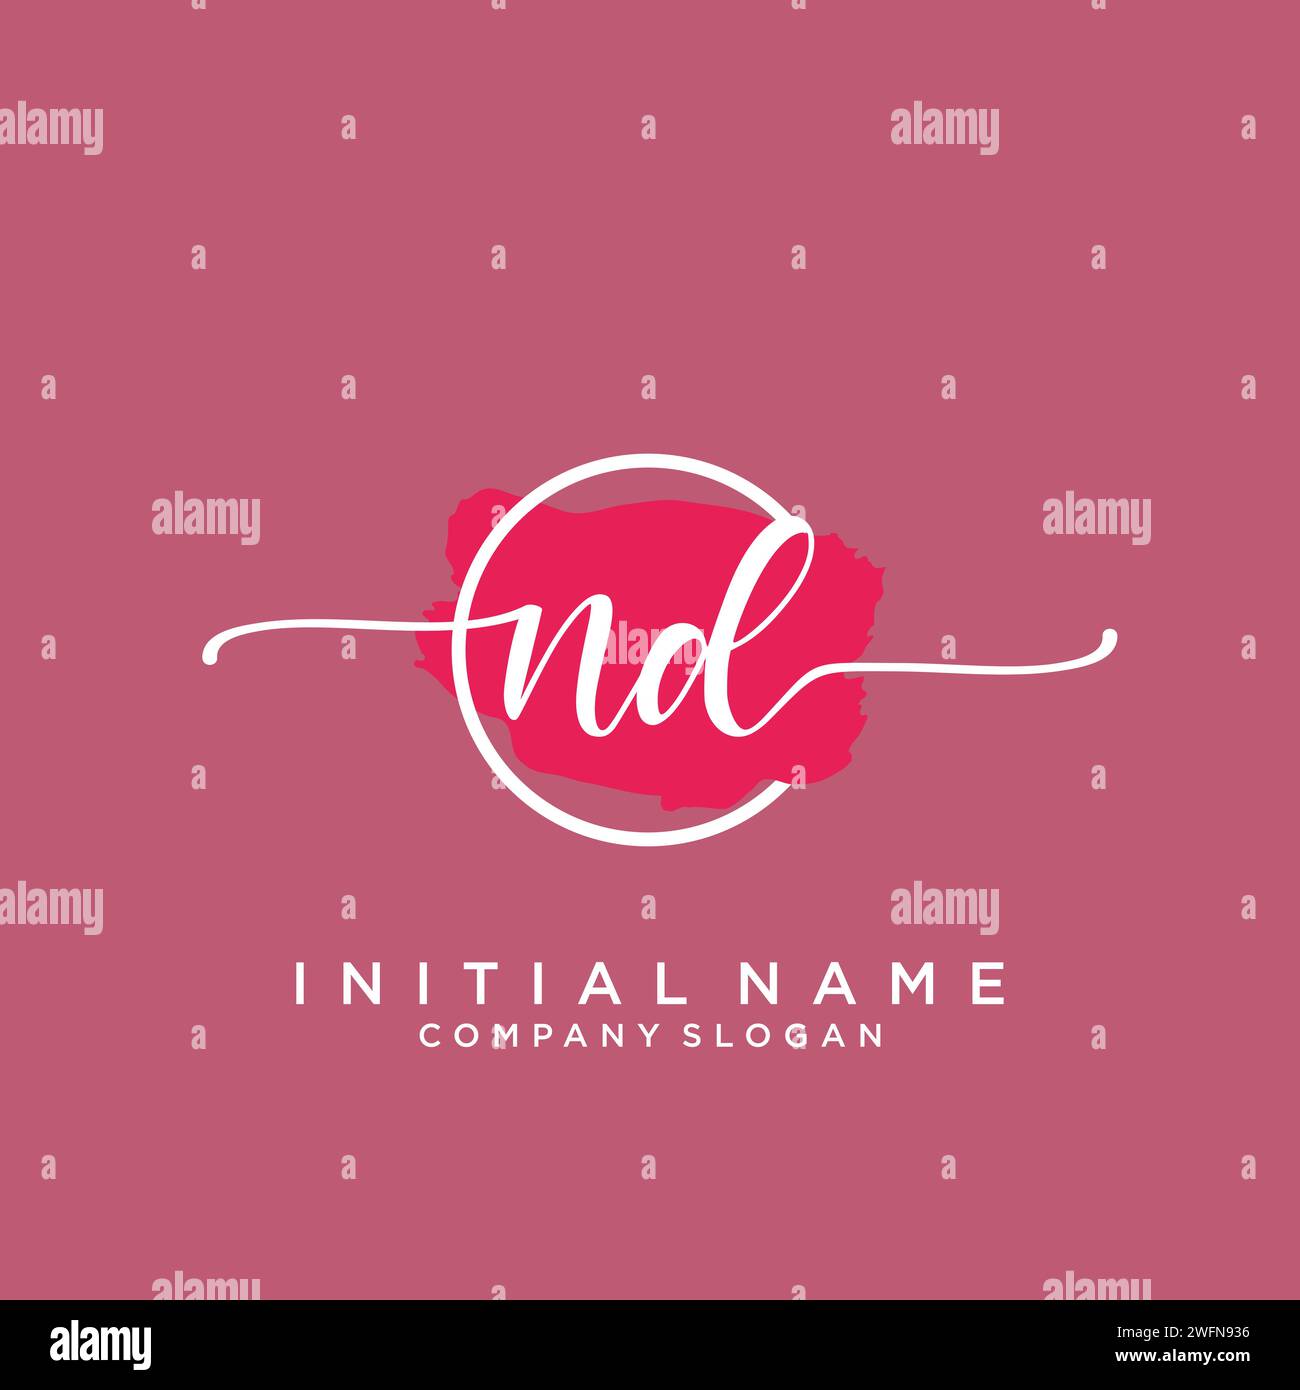 ND Initial handwriting logo with circle Stock Vector